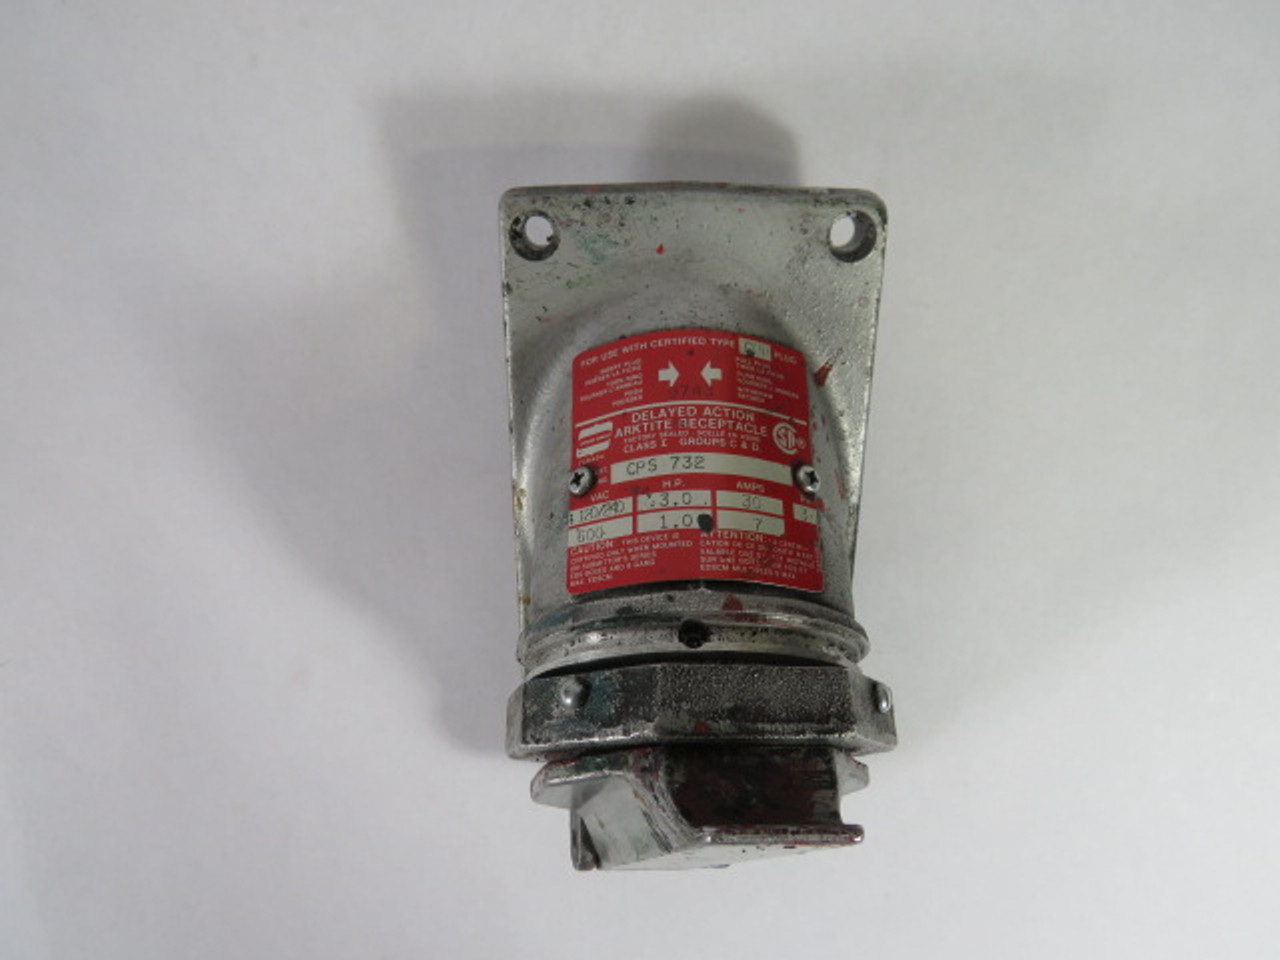 Crouse-Hinds CPS-732 Delayed Action Arktite Receptacle 120/240VAC 30A ! AS IS !